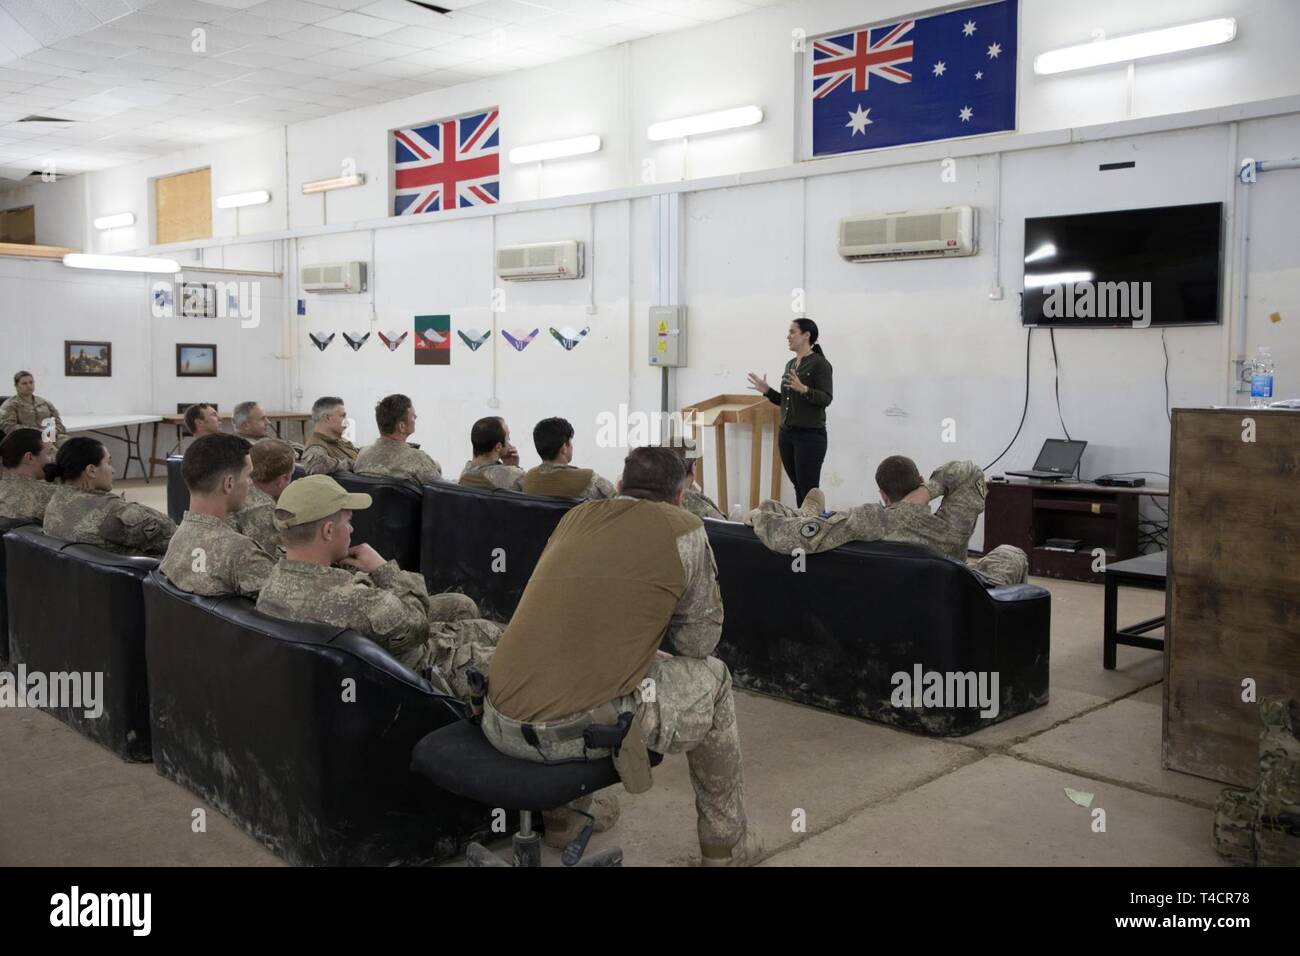 New Zealand ambassador to Iraq, Ms. Tredene, addressed New Zealand army officers assigned to Task Group Taji 8 (TGT-8) at Taji Military Complex, Iraq, March 18, 2019. TGT-8 is a combined Australian-New Zealand Task Group that provides the Iraqi Secu-rity Forces with training to enable the stabilization of areas cleared of Daesh. Stock Photo